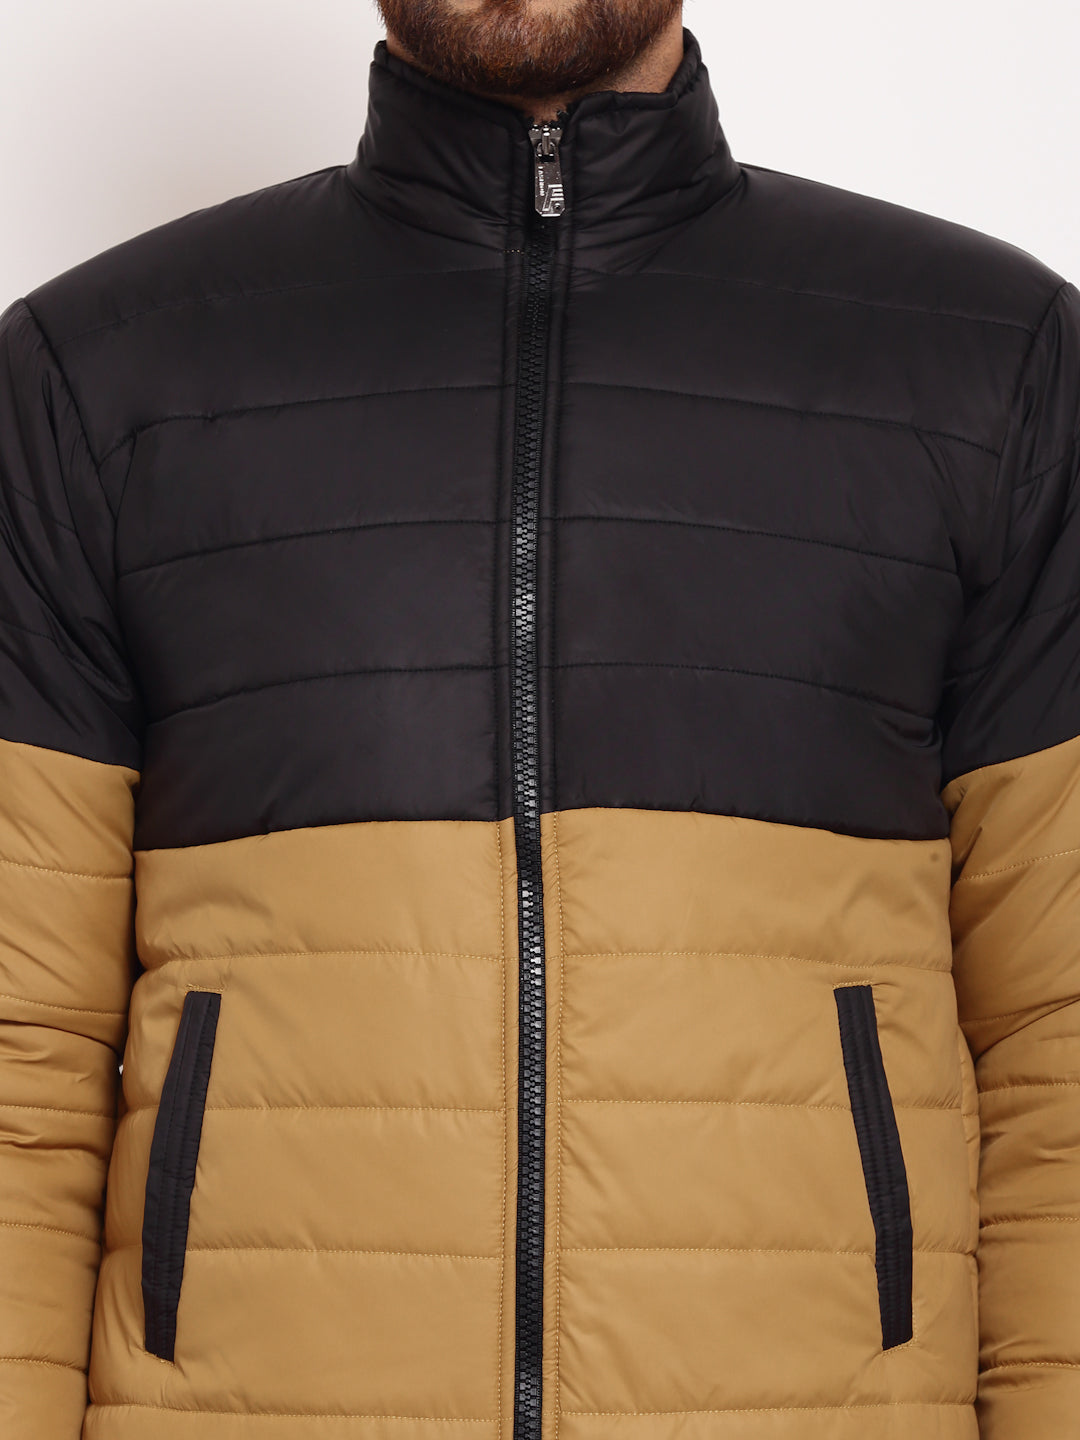 MUSTARD QUILTED WINTER JACKETS FOR MEN BY KLOTTHE®